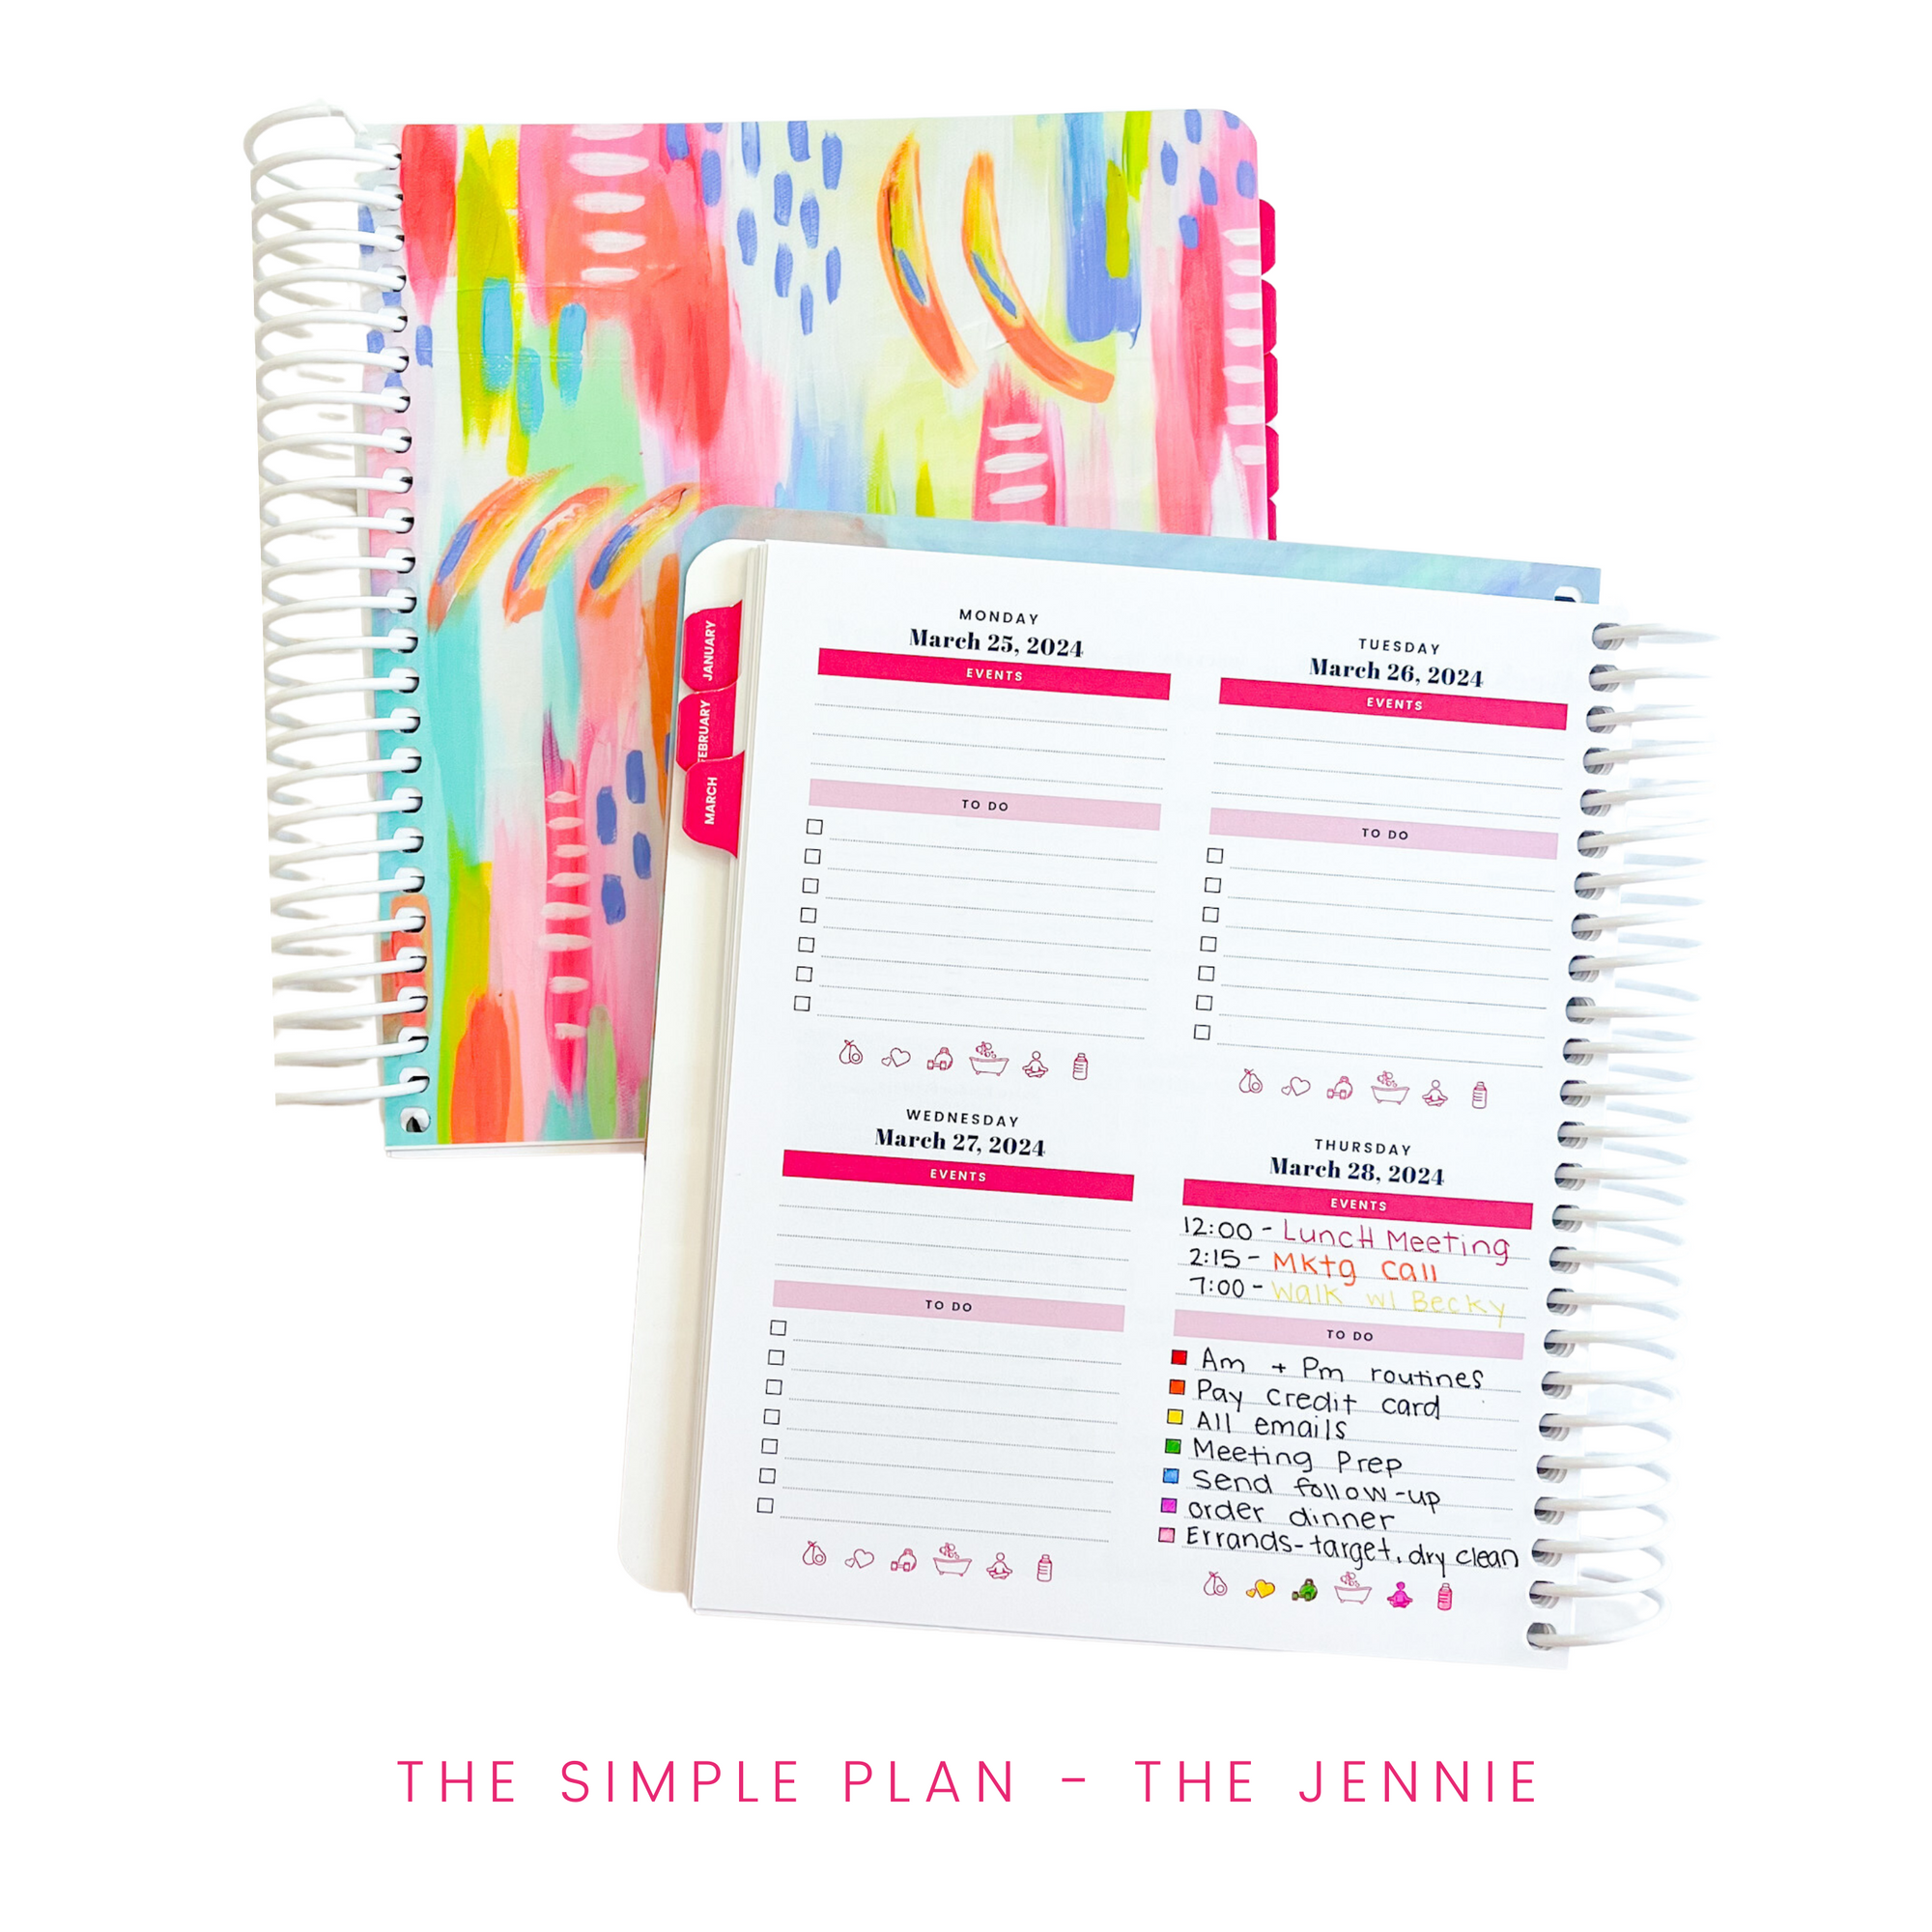 The Simple Plan | The Jennie